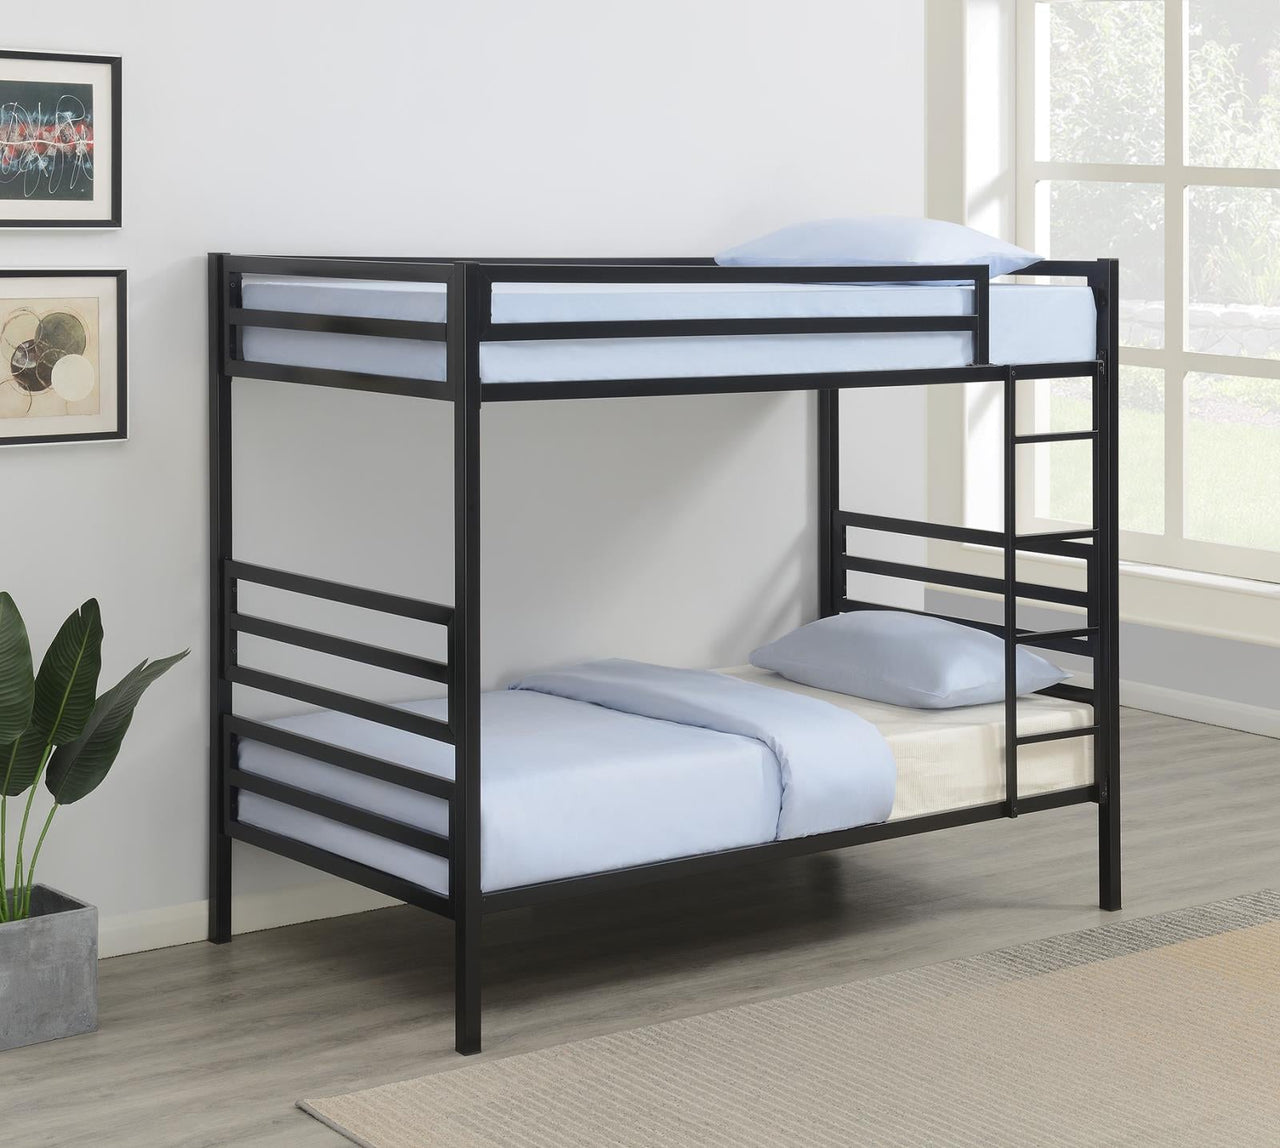 422683 BUNKBED T/T image